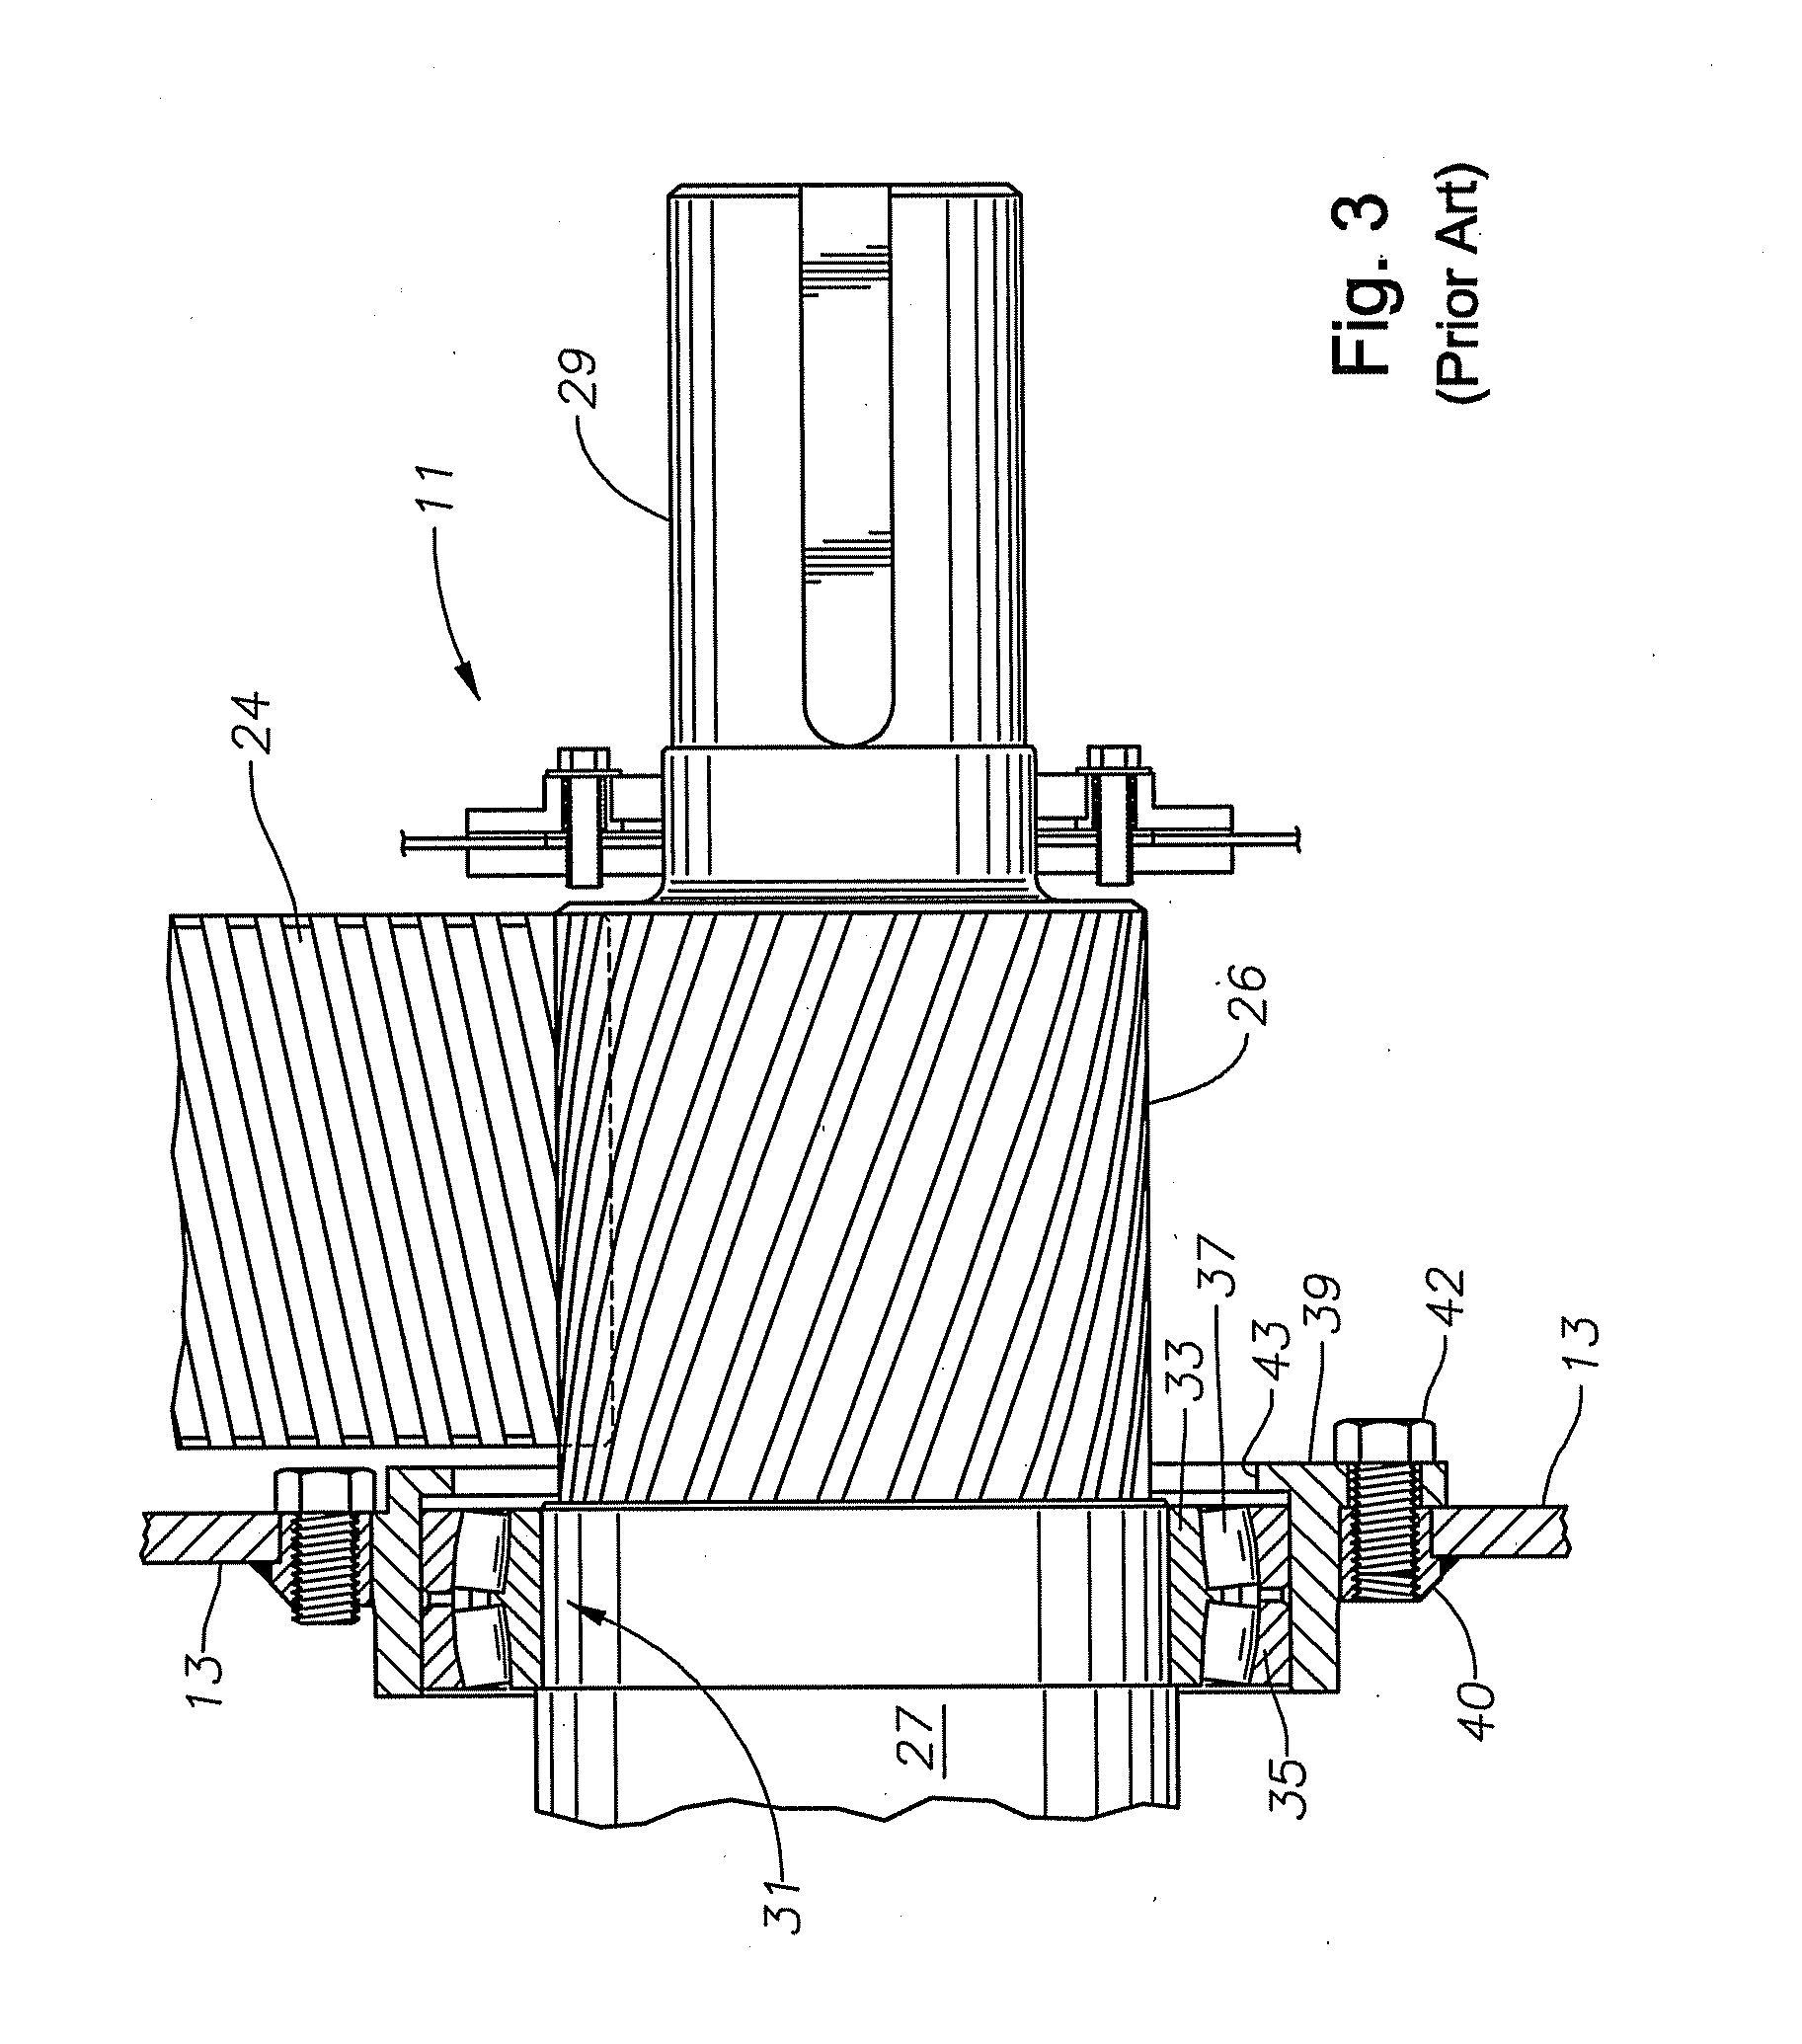 Floating Pinion Bearing for a Reciprocating Pump